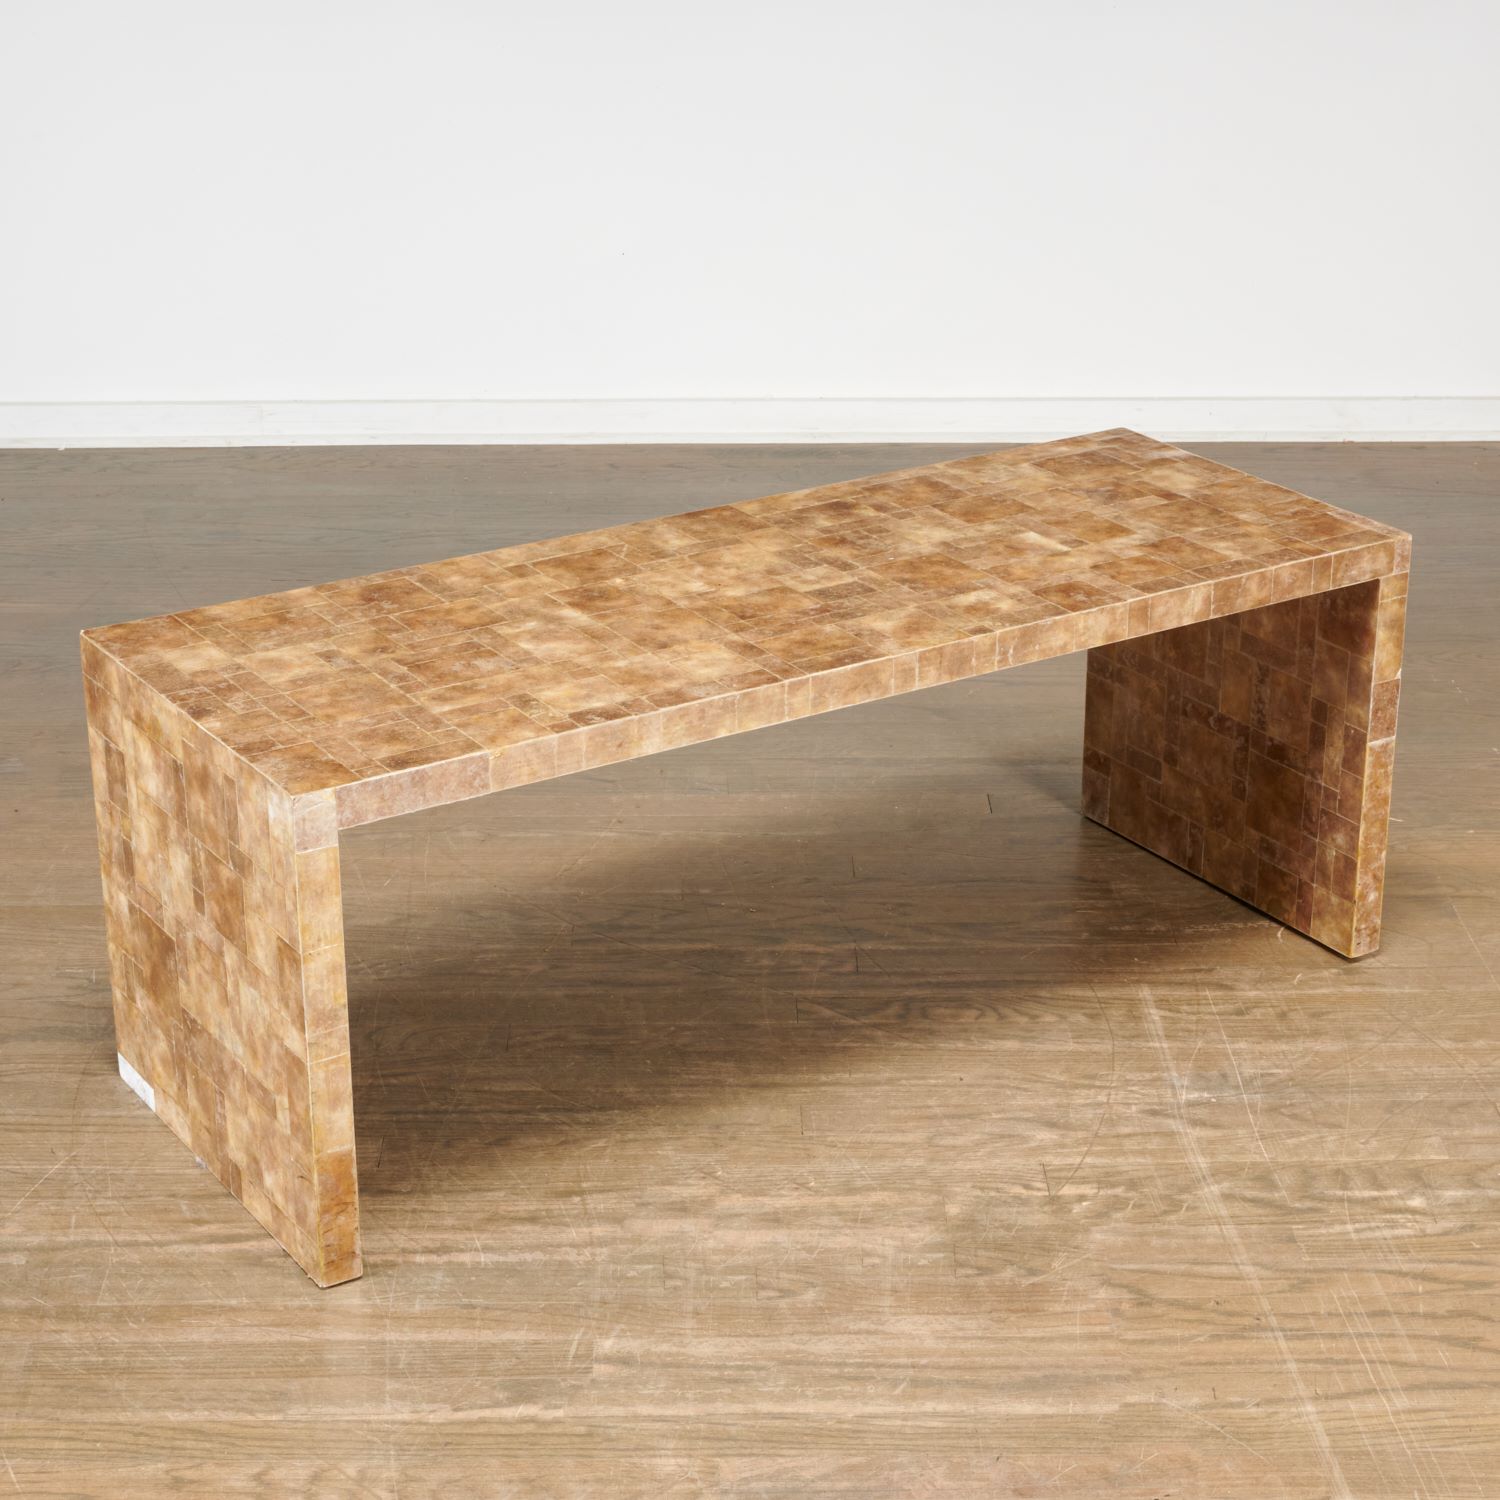 MICA VENEERED COFFEE TABLE AFTER 2ce11a